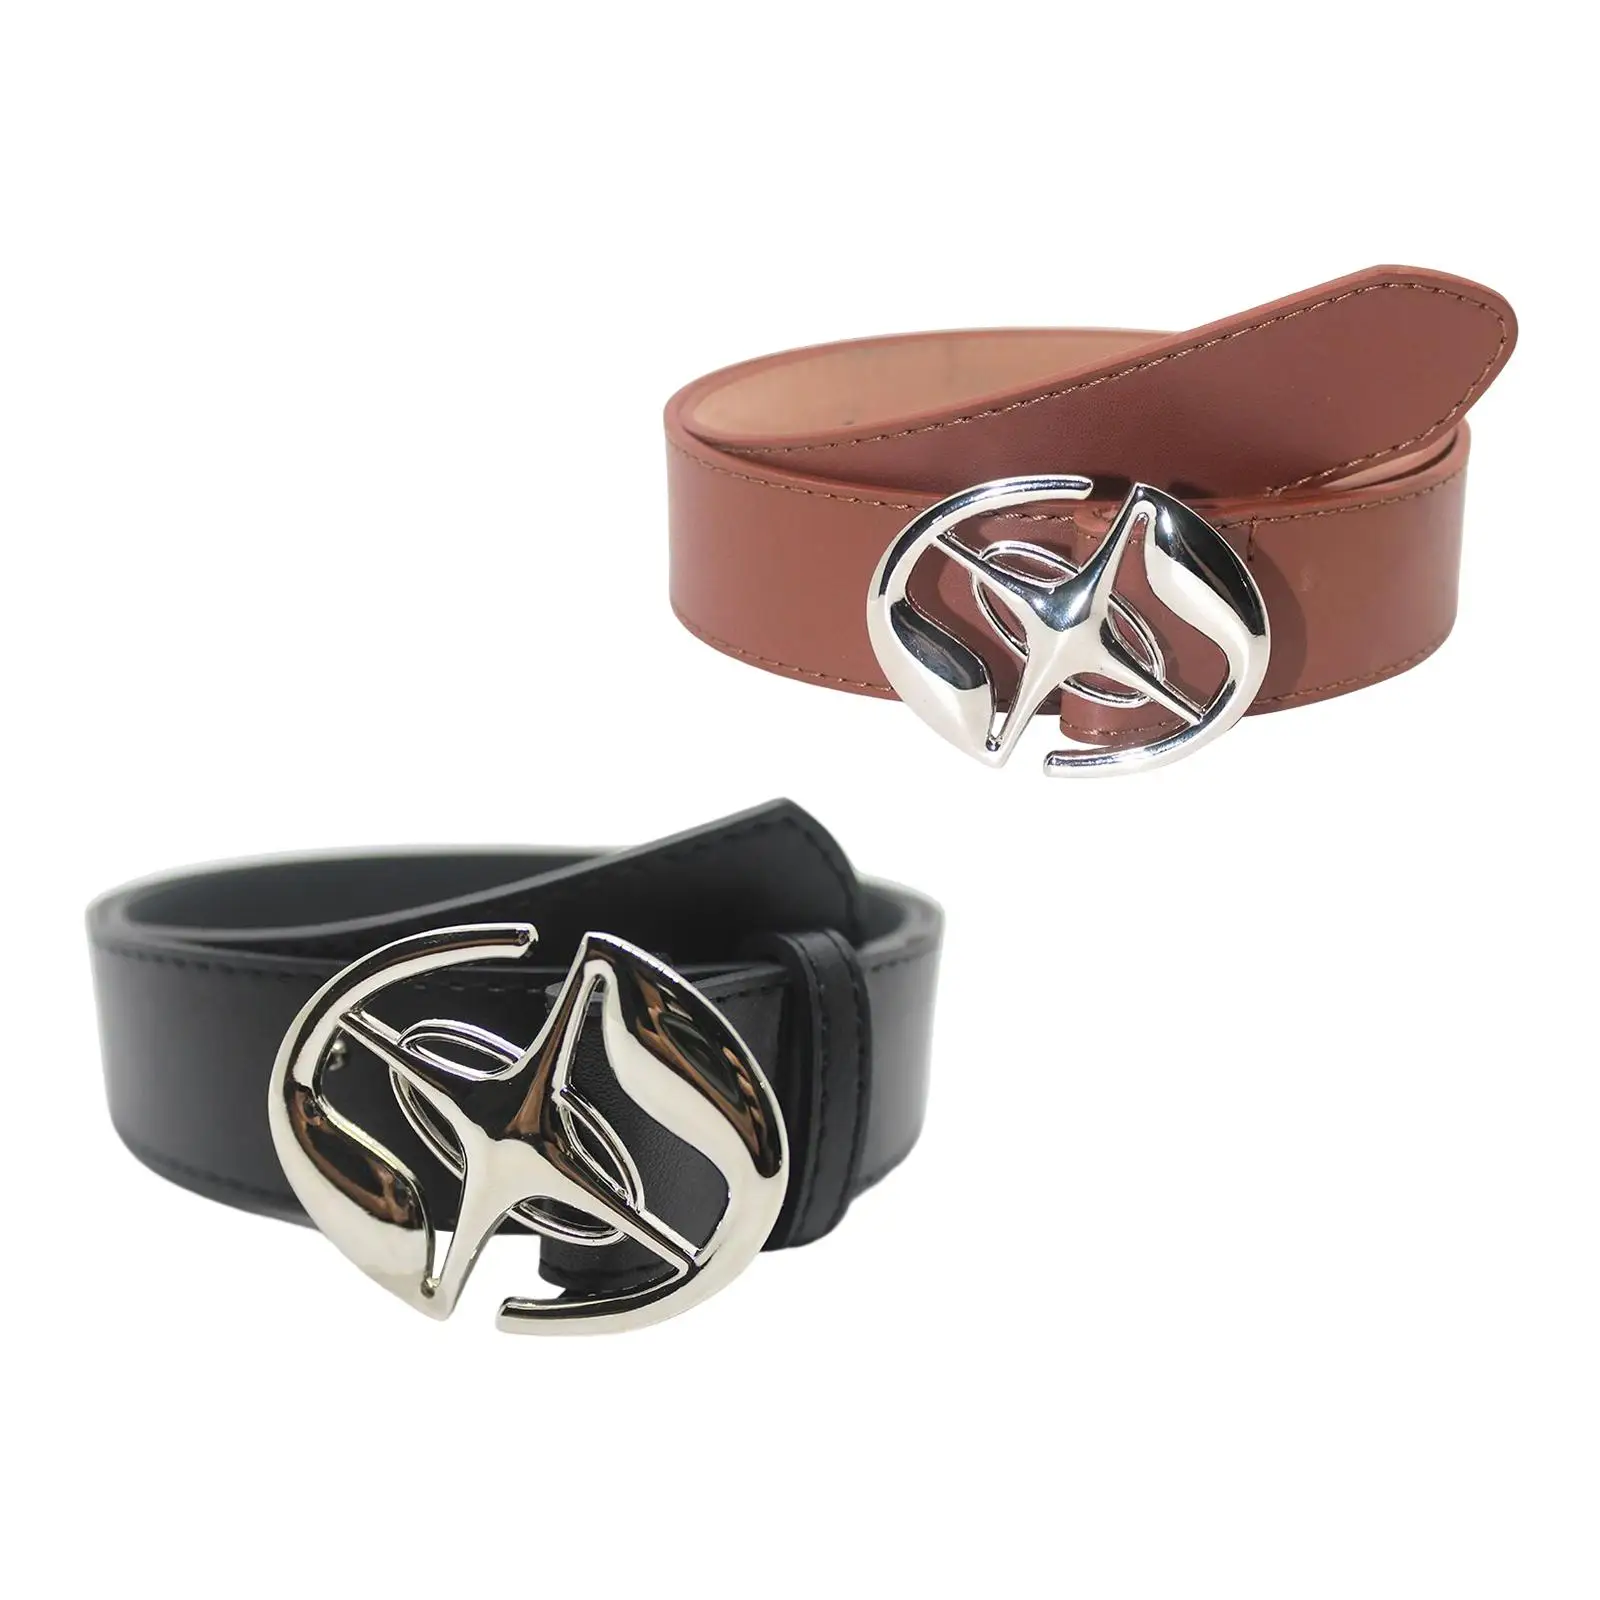 PU Leather Women Belt Ladies Belts with Alloy Pin Buckle Casual Dress Waist Belt Trousers Accessories Jeans Pants Travel